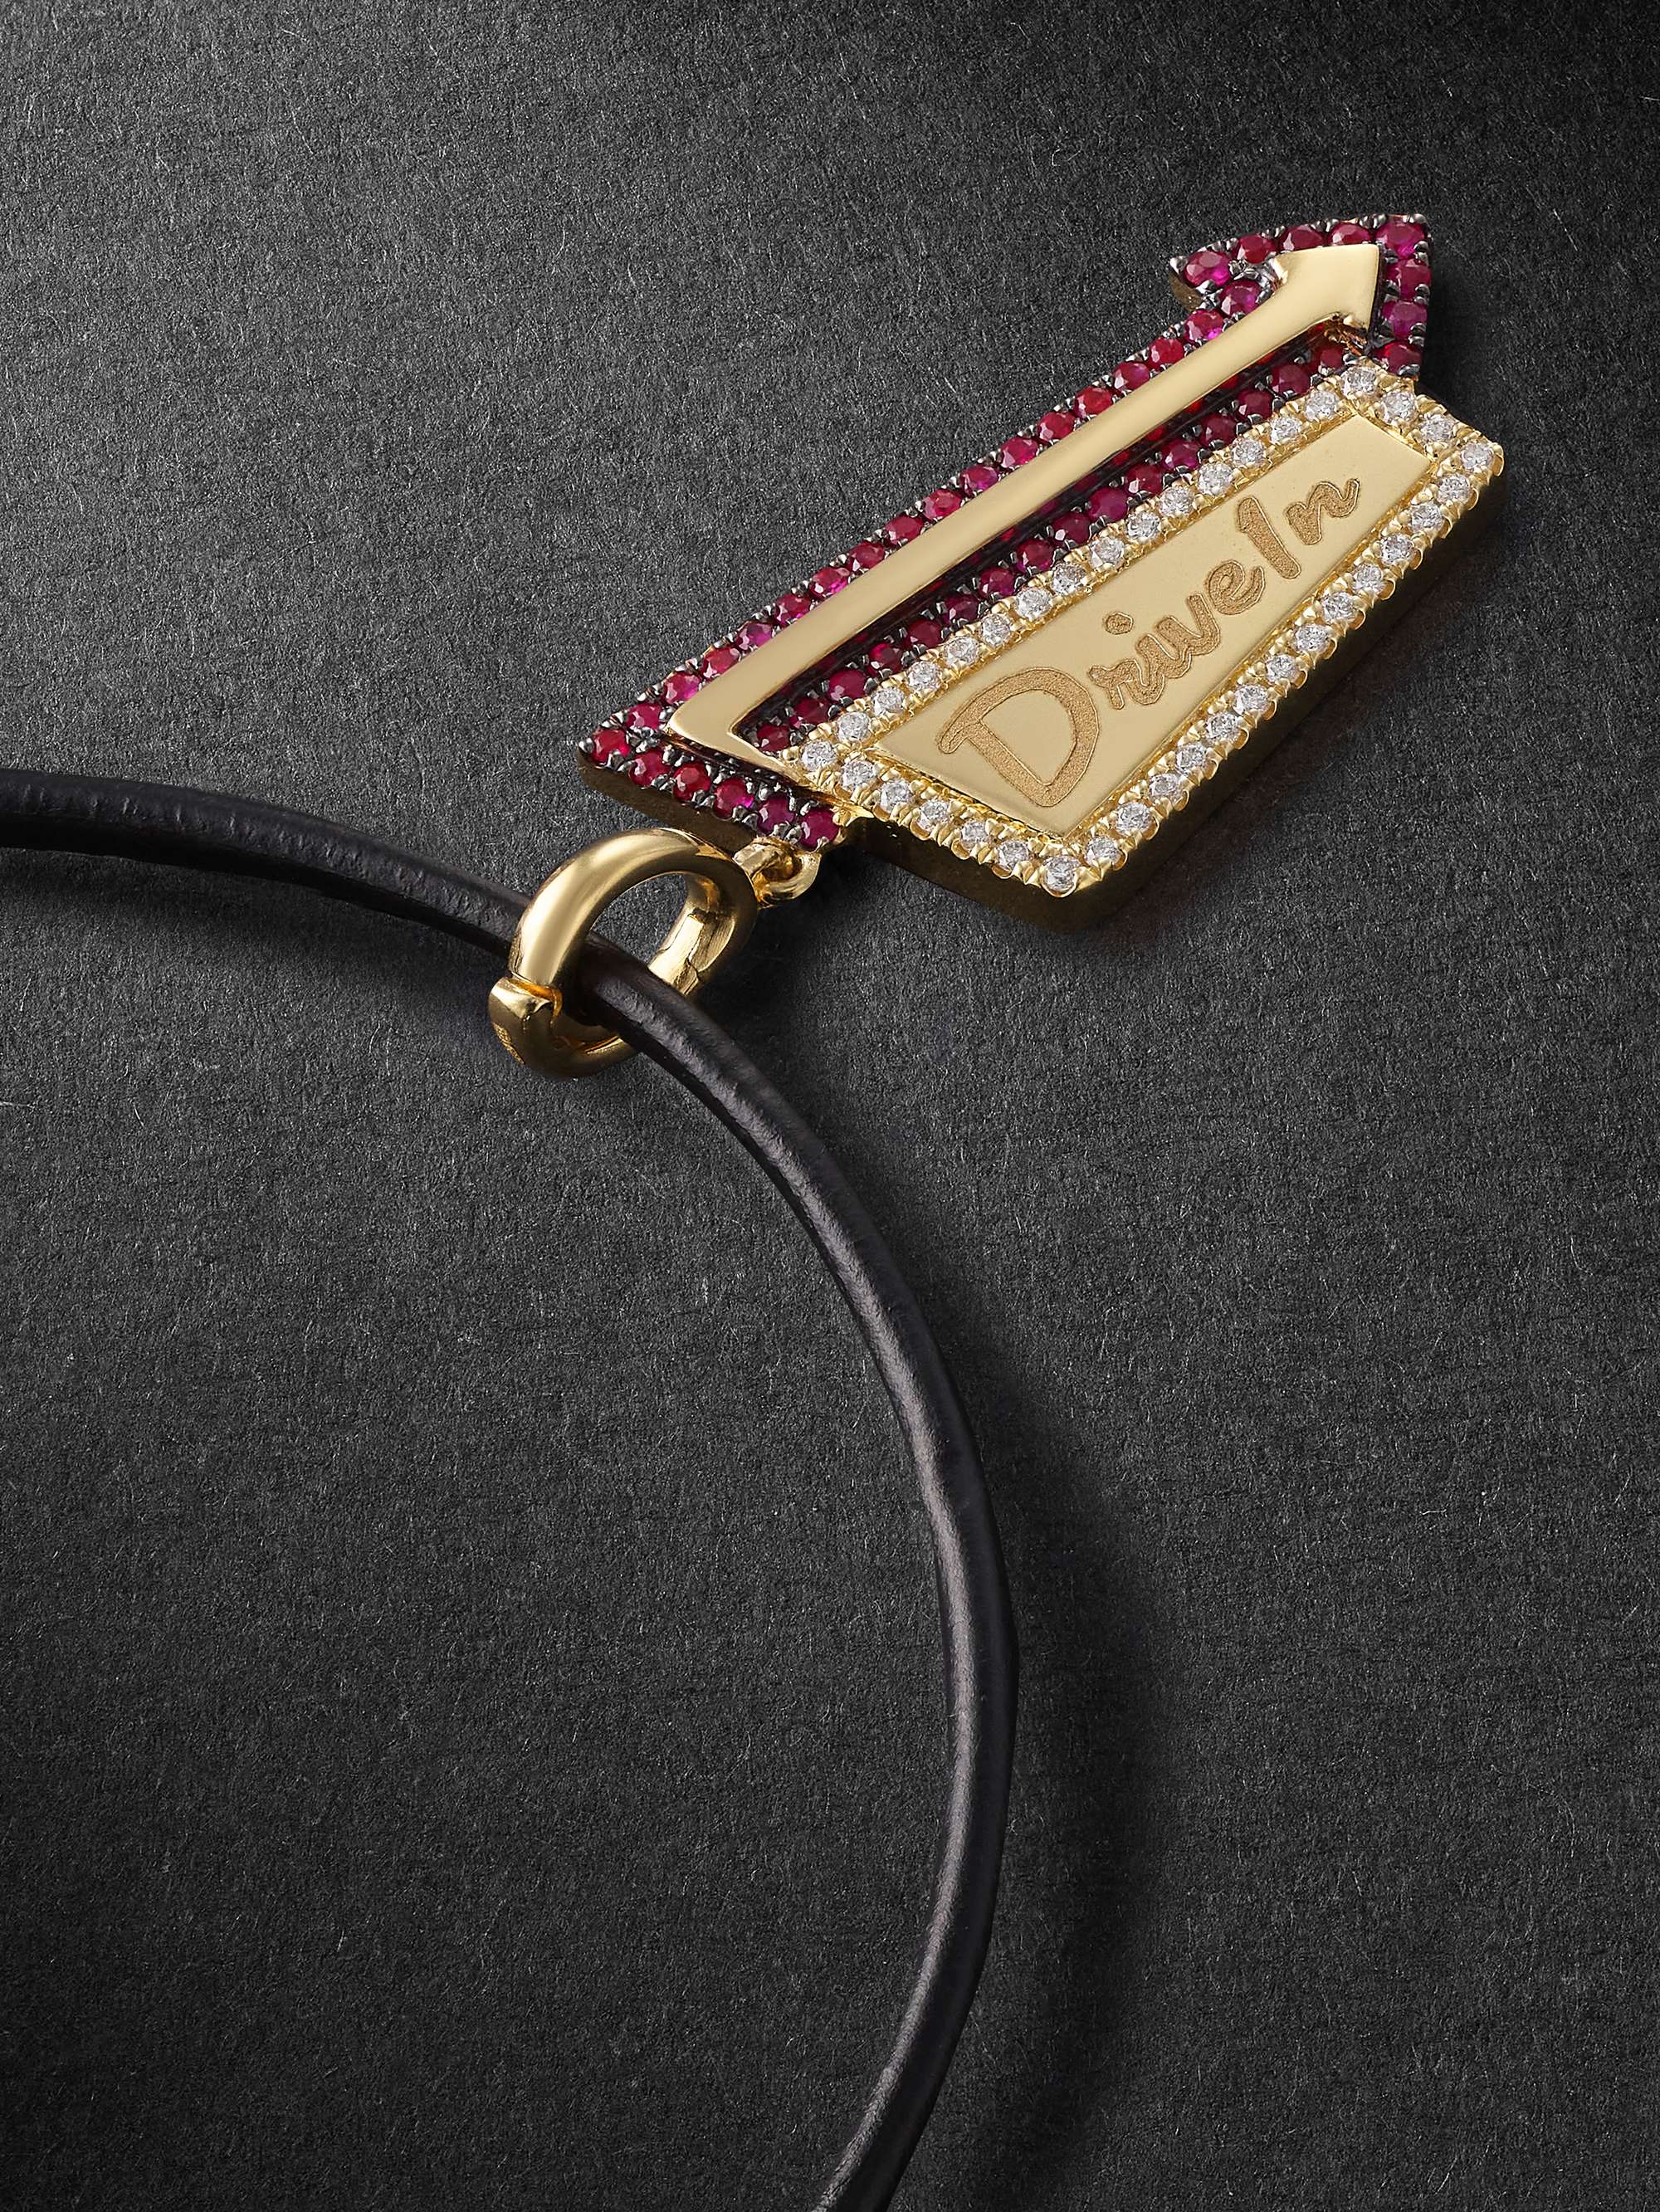 ANNOUSHKA Drive In 18-Karat Yellow and Blackened Gold, Ruby and Diamond Necklace Pendant